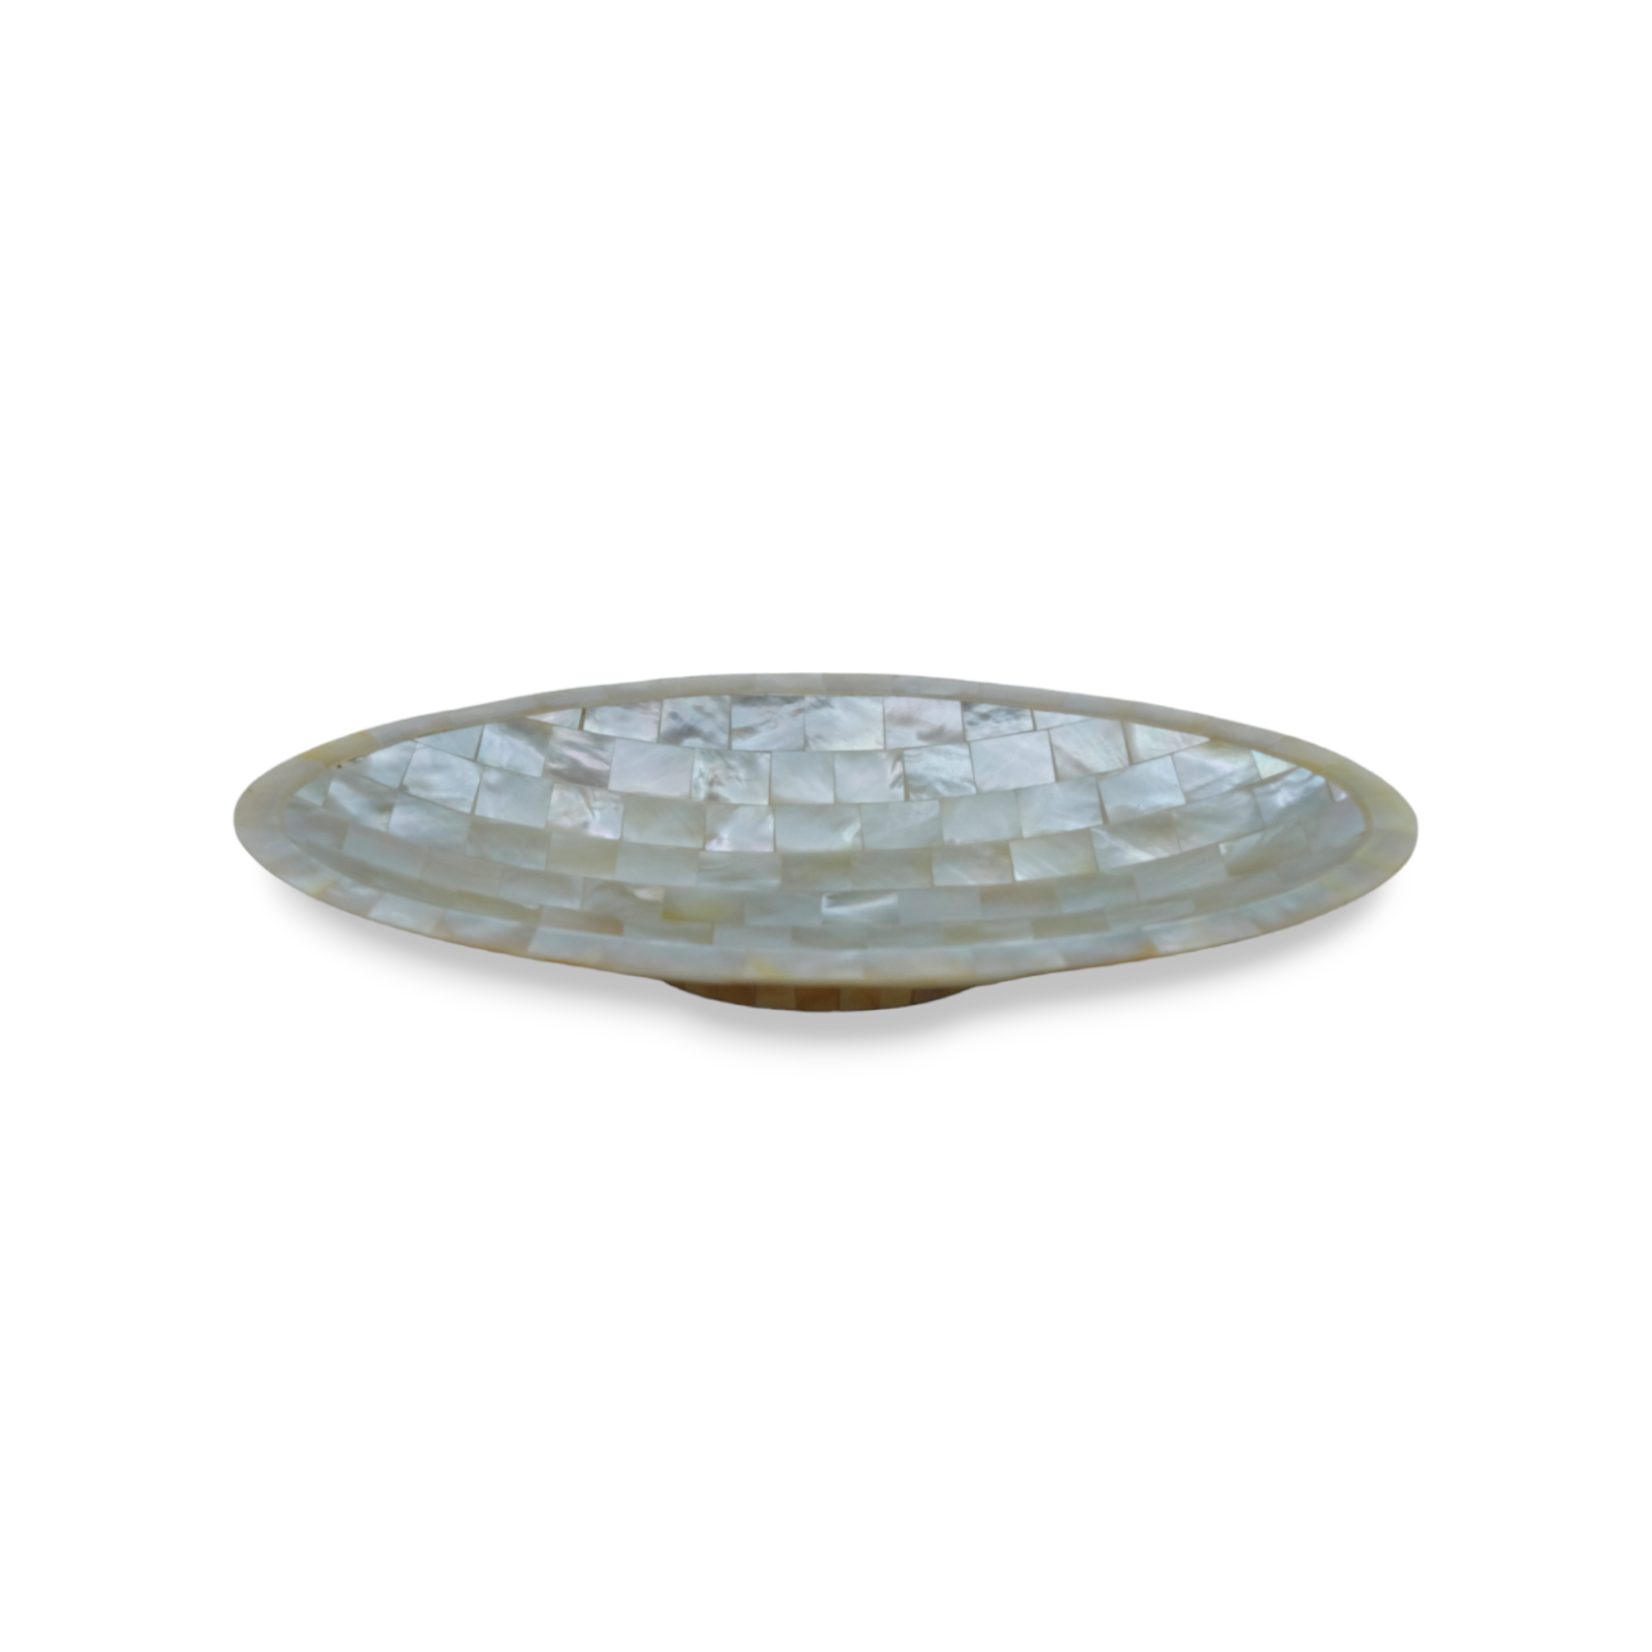 Handmade Mother of Pearl Mosaic Oval Dish 19cm x 9 cm